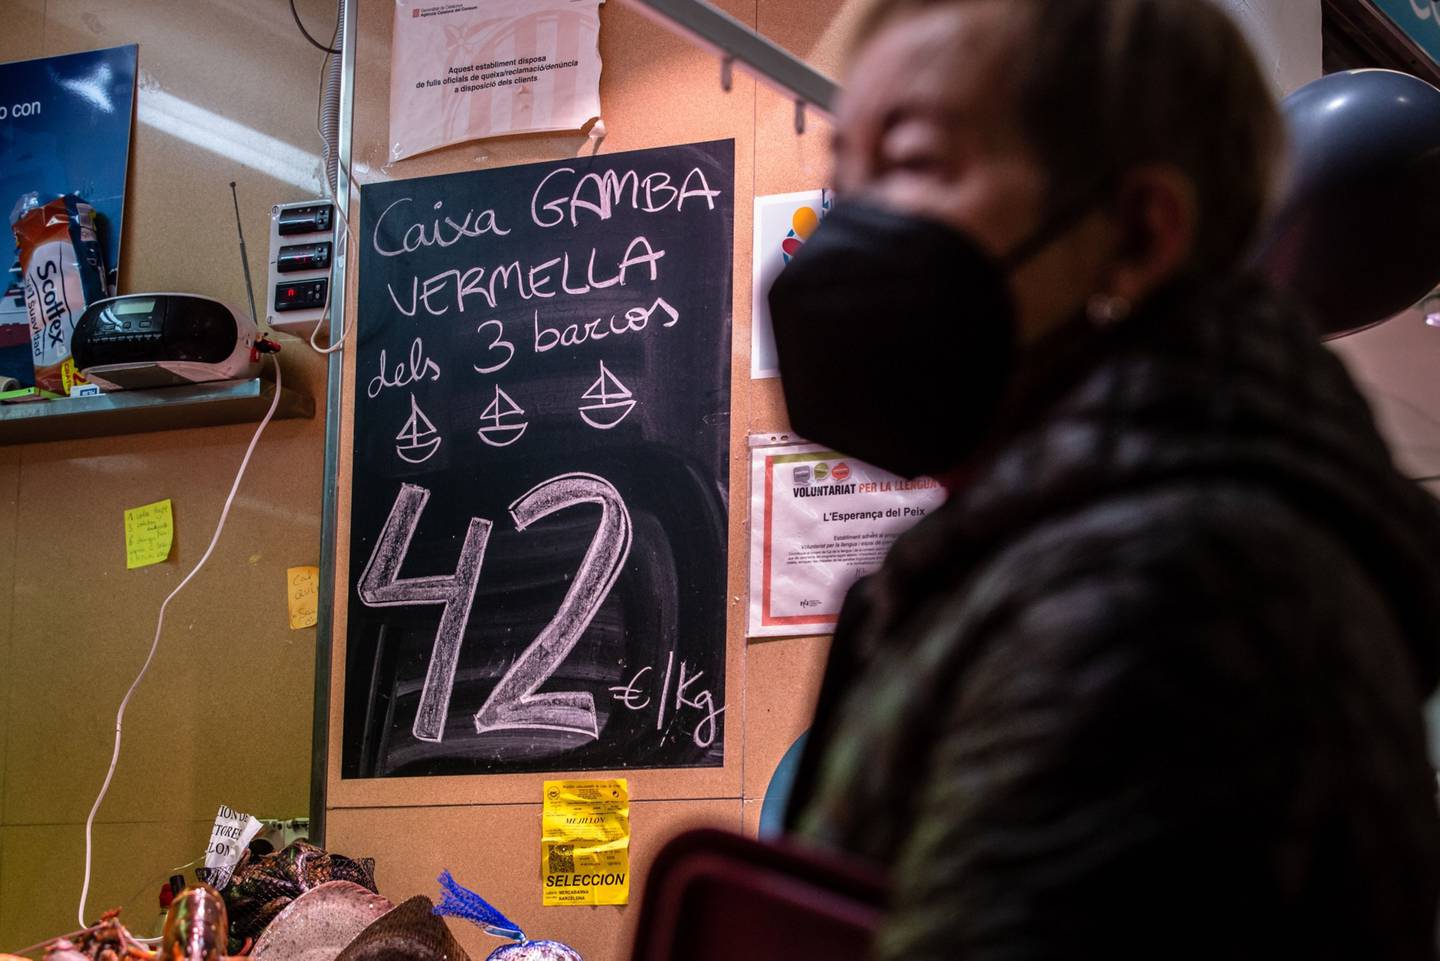 Euro price per kilo information on a fresh fish stall at a food market in the Molins de Re district of Barcelona, Spain, on Friday, Dec. 10, 2021.